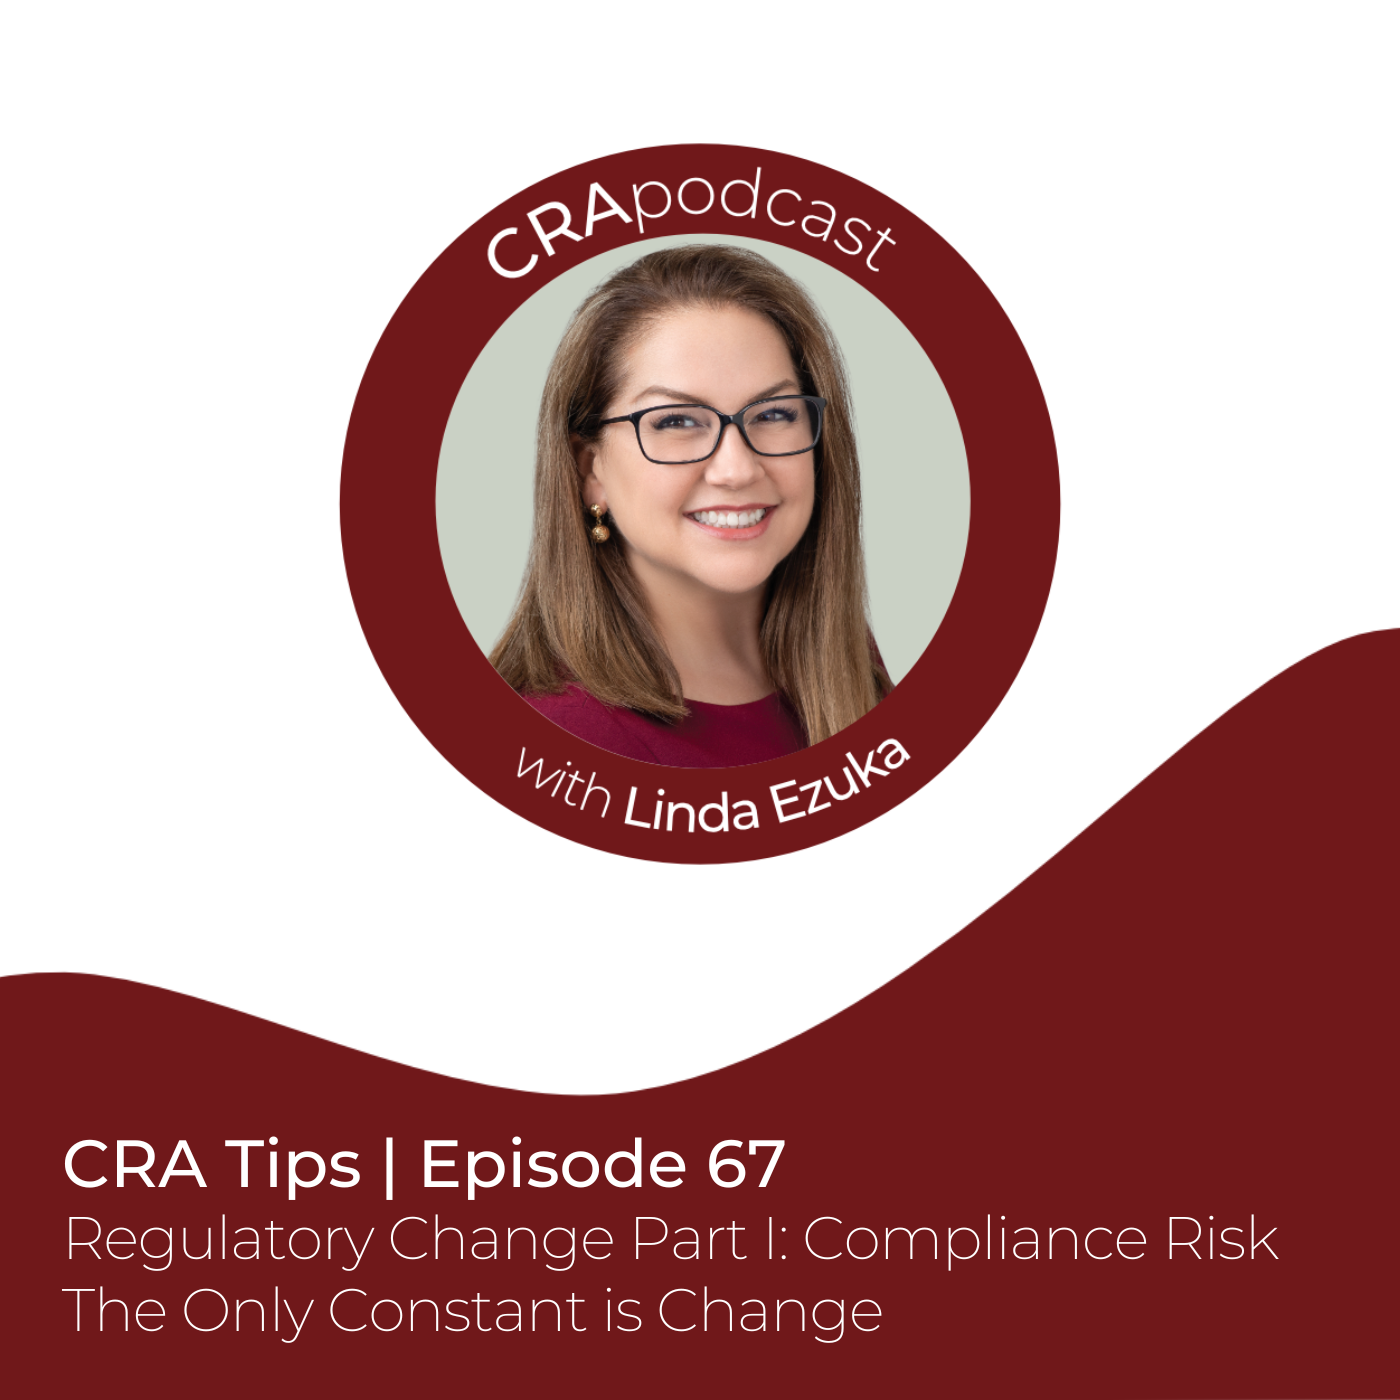 CRA Tips: CRA Tips: Regulatory Change Part I: Compliance Risk - The Only Constant is Change